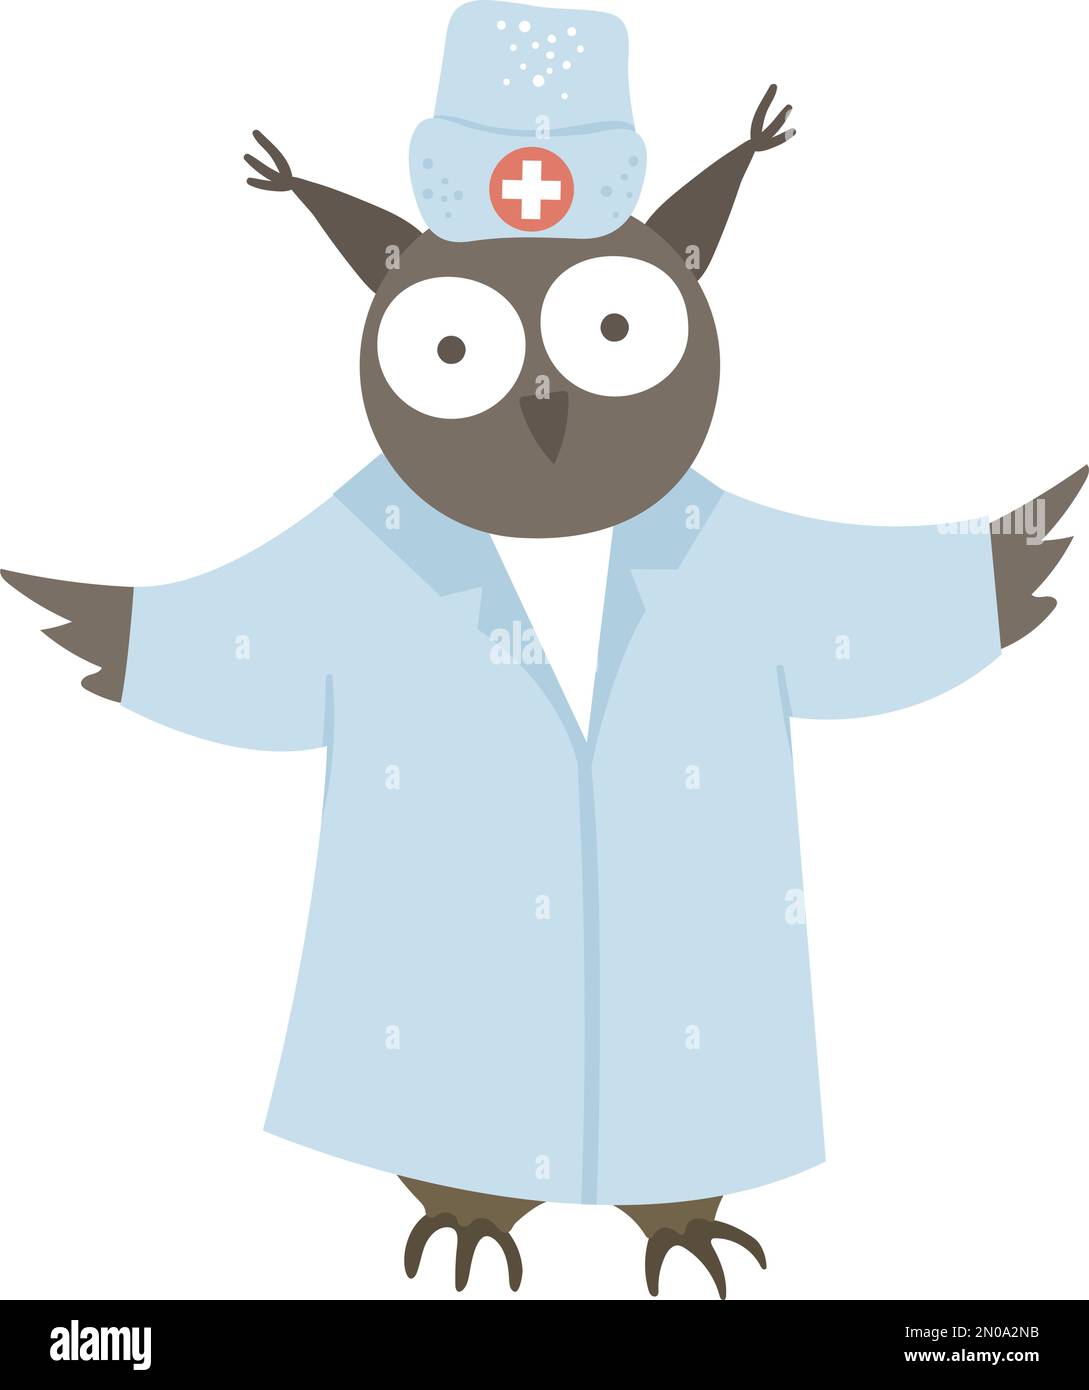 Vector animal doctor. Cute funny owl character. Medical picture for children. Hospital illustration isolated on white background. Stock Vector